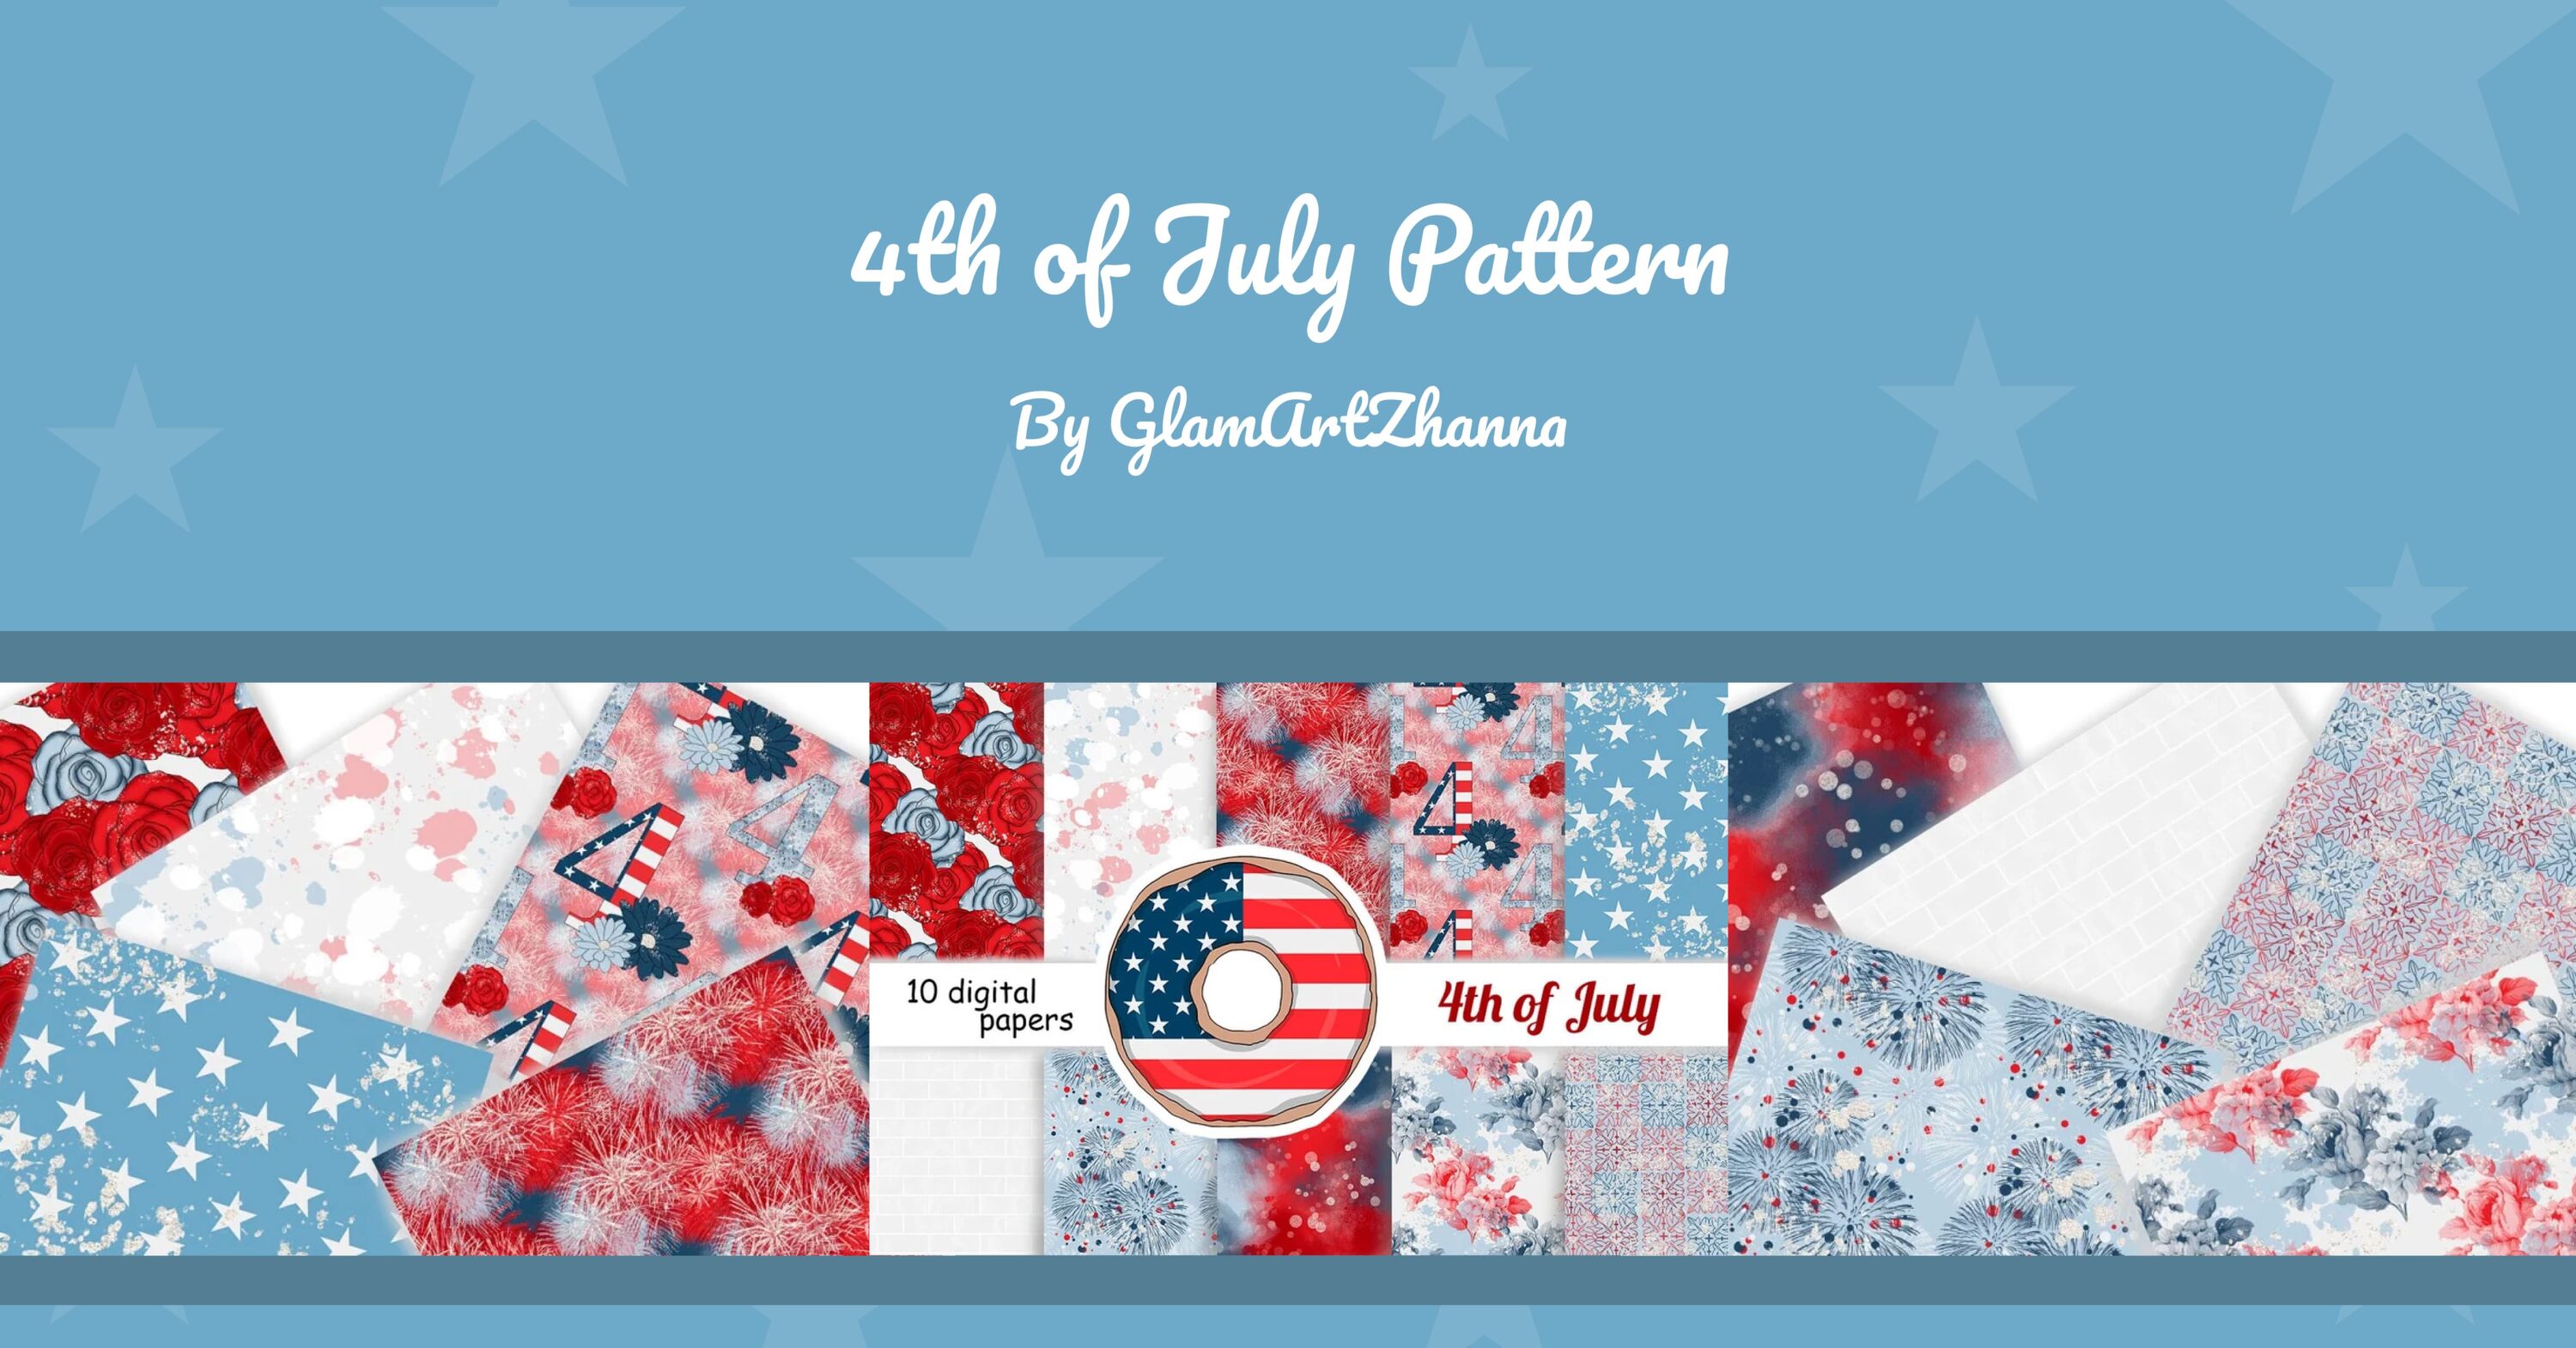 4th of July Pattern facebook image.